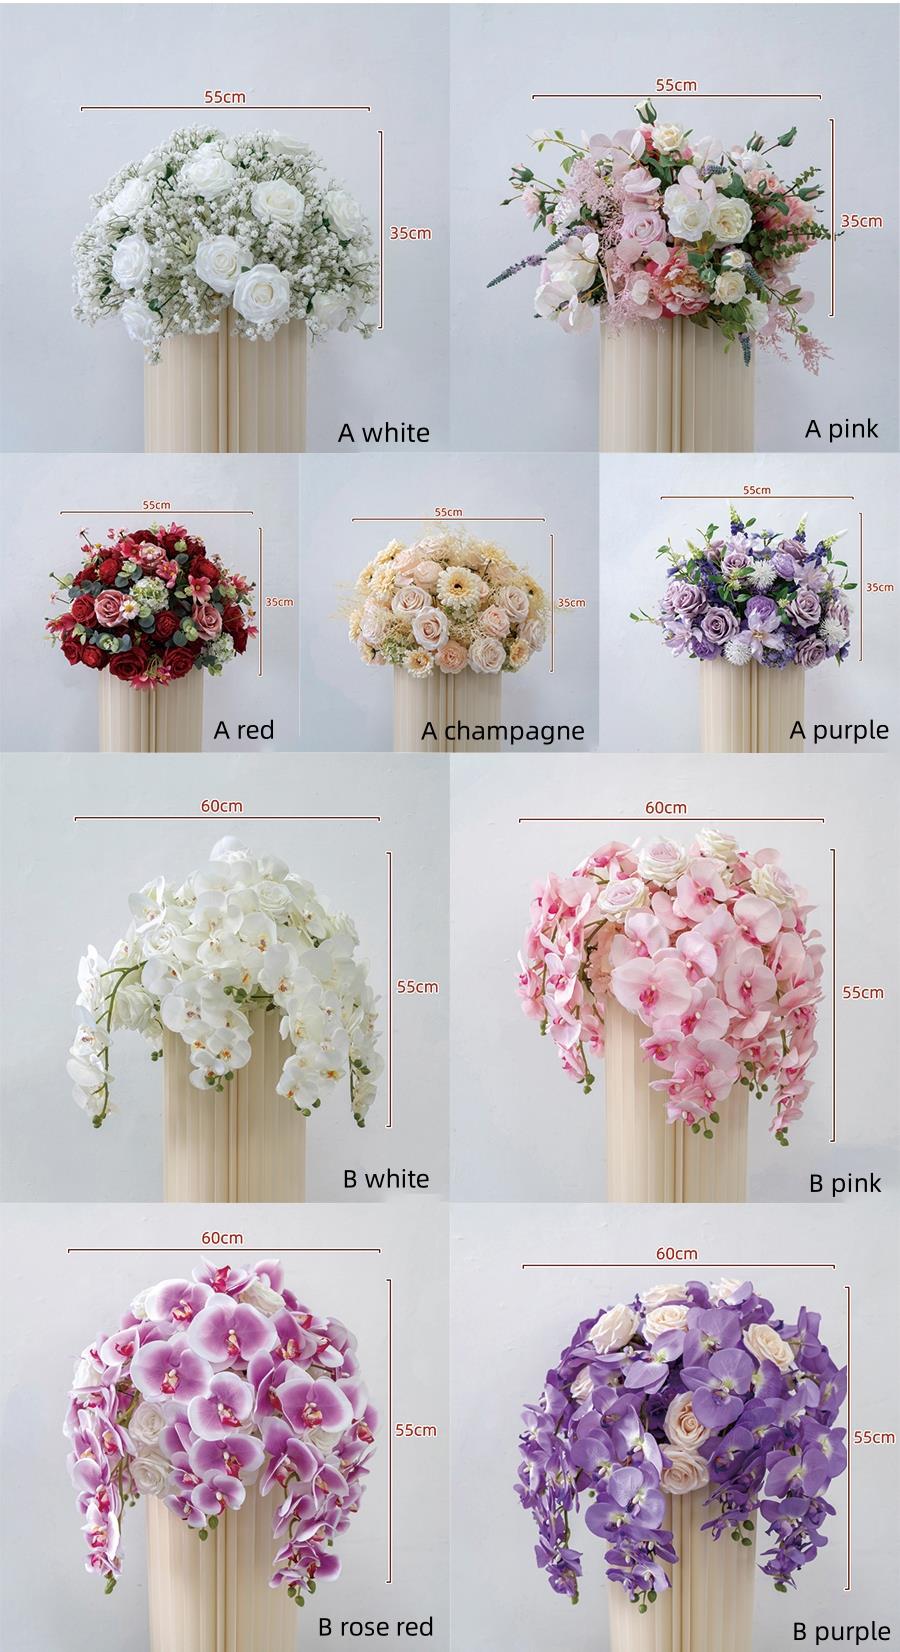 Arranging the flowers in a visually appealing composition